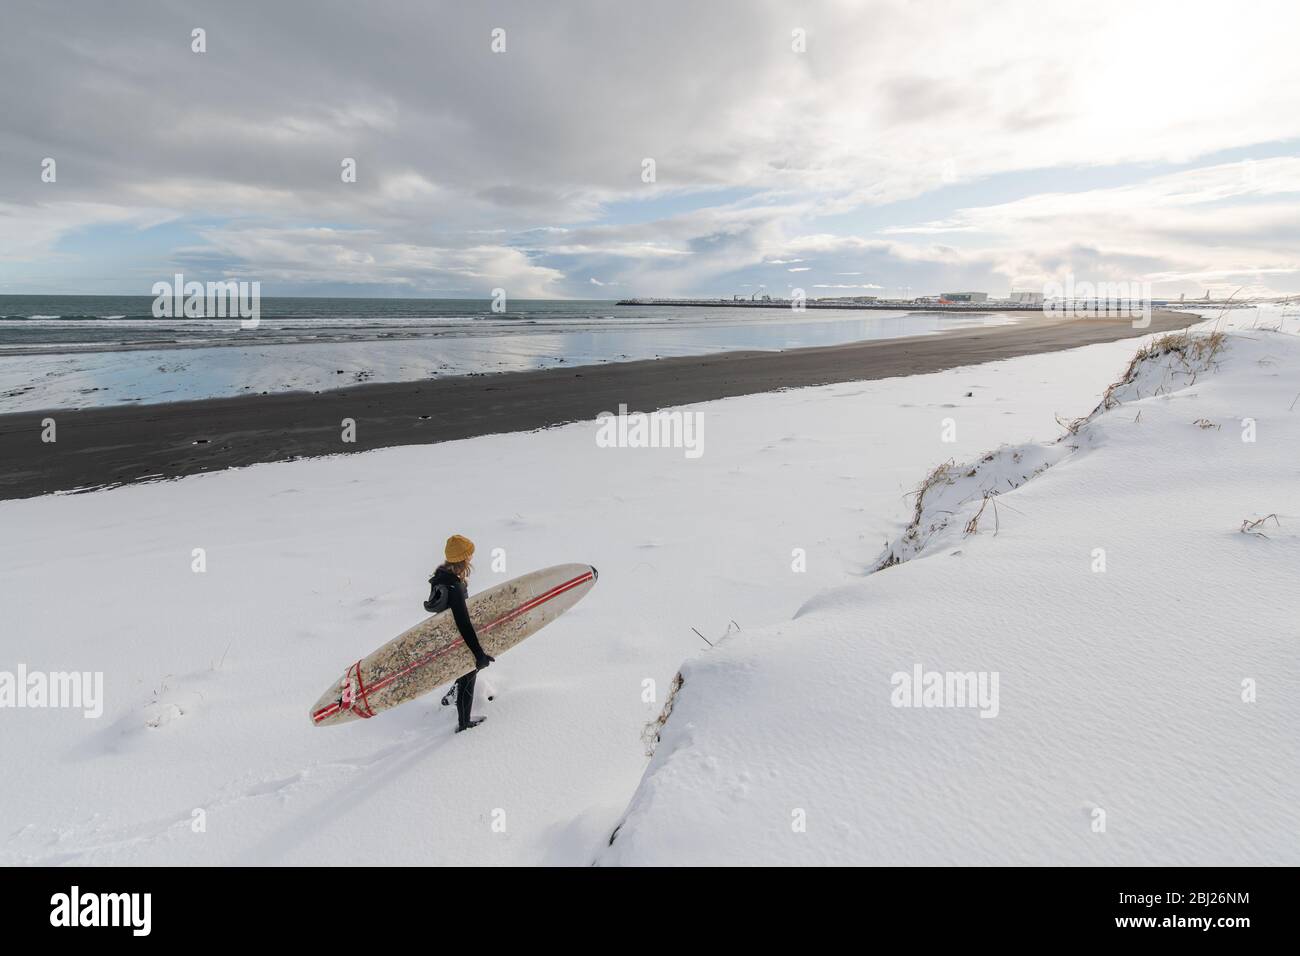 Rear view of a woman wearing a wetsuit and holding a surfboard walking along a snowy beach. Stock Photo